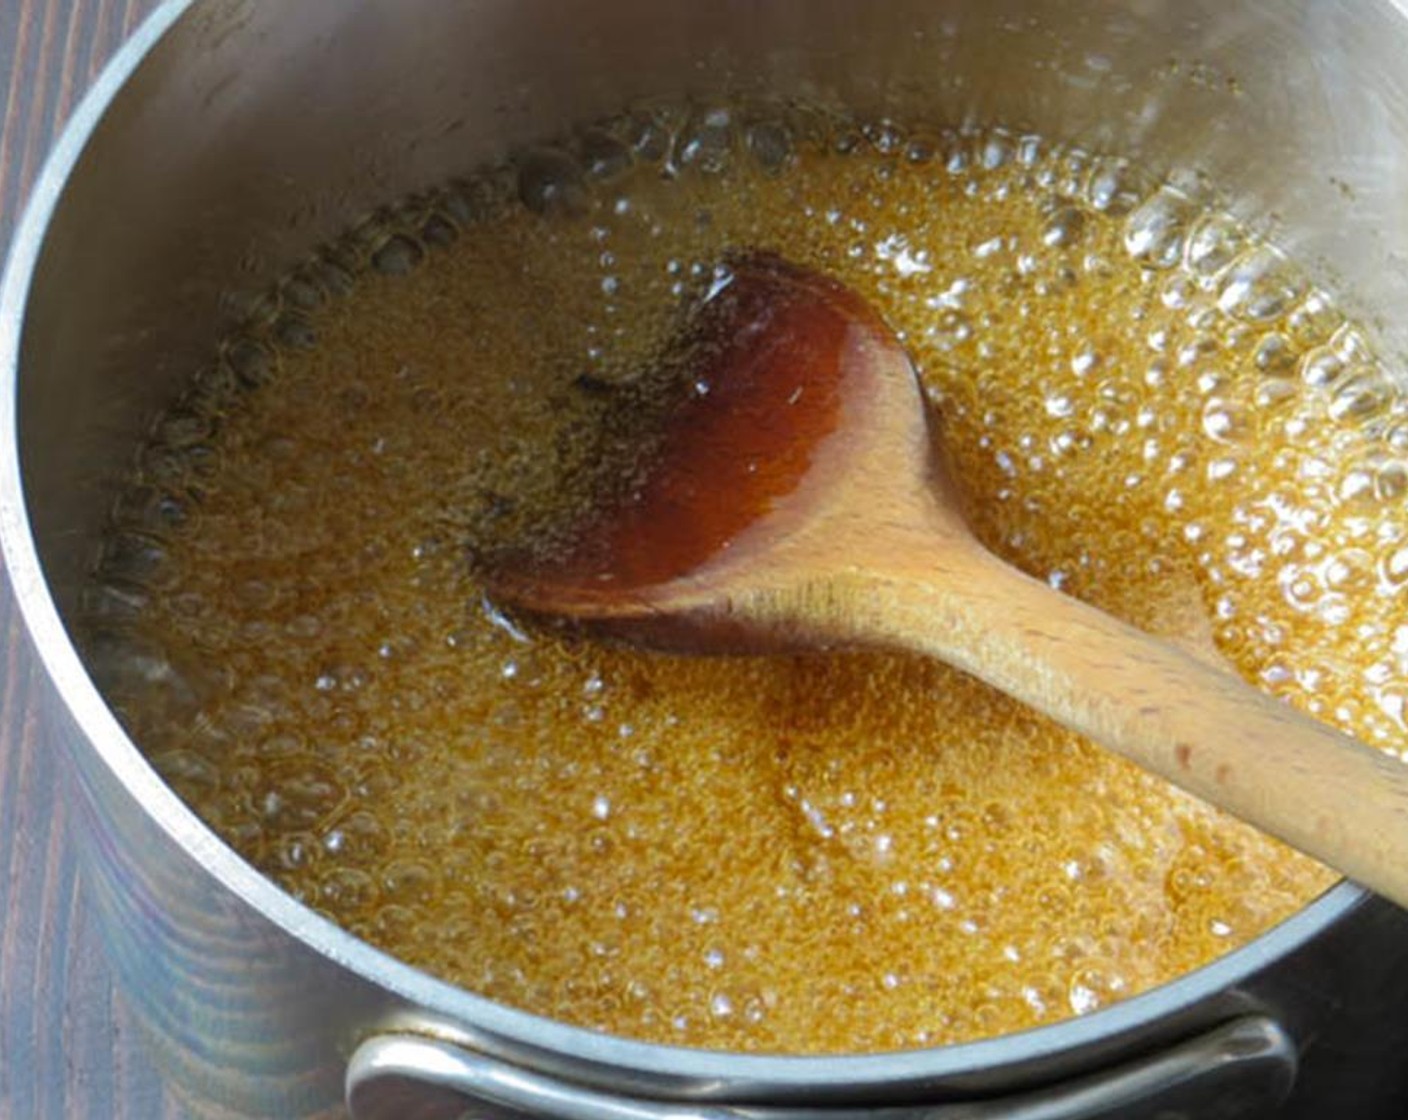 step 3 In a small saucepan, combine the Orange Blossom Honey (1/3 cup), Extra-Virgin Olive Oil (1/3 cup), and Brown Sugar (1/2 cup). Heat over medium high heat, stirring occasionally until mixture comes to a rolling boil and the sugar is dissolved.